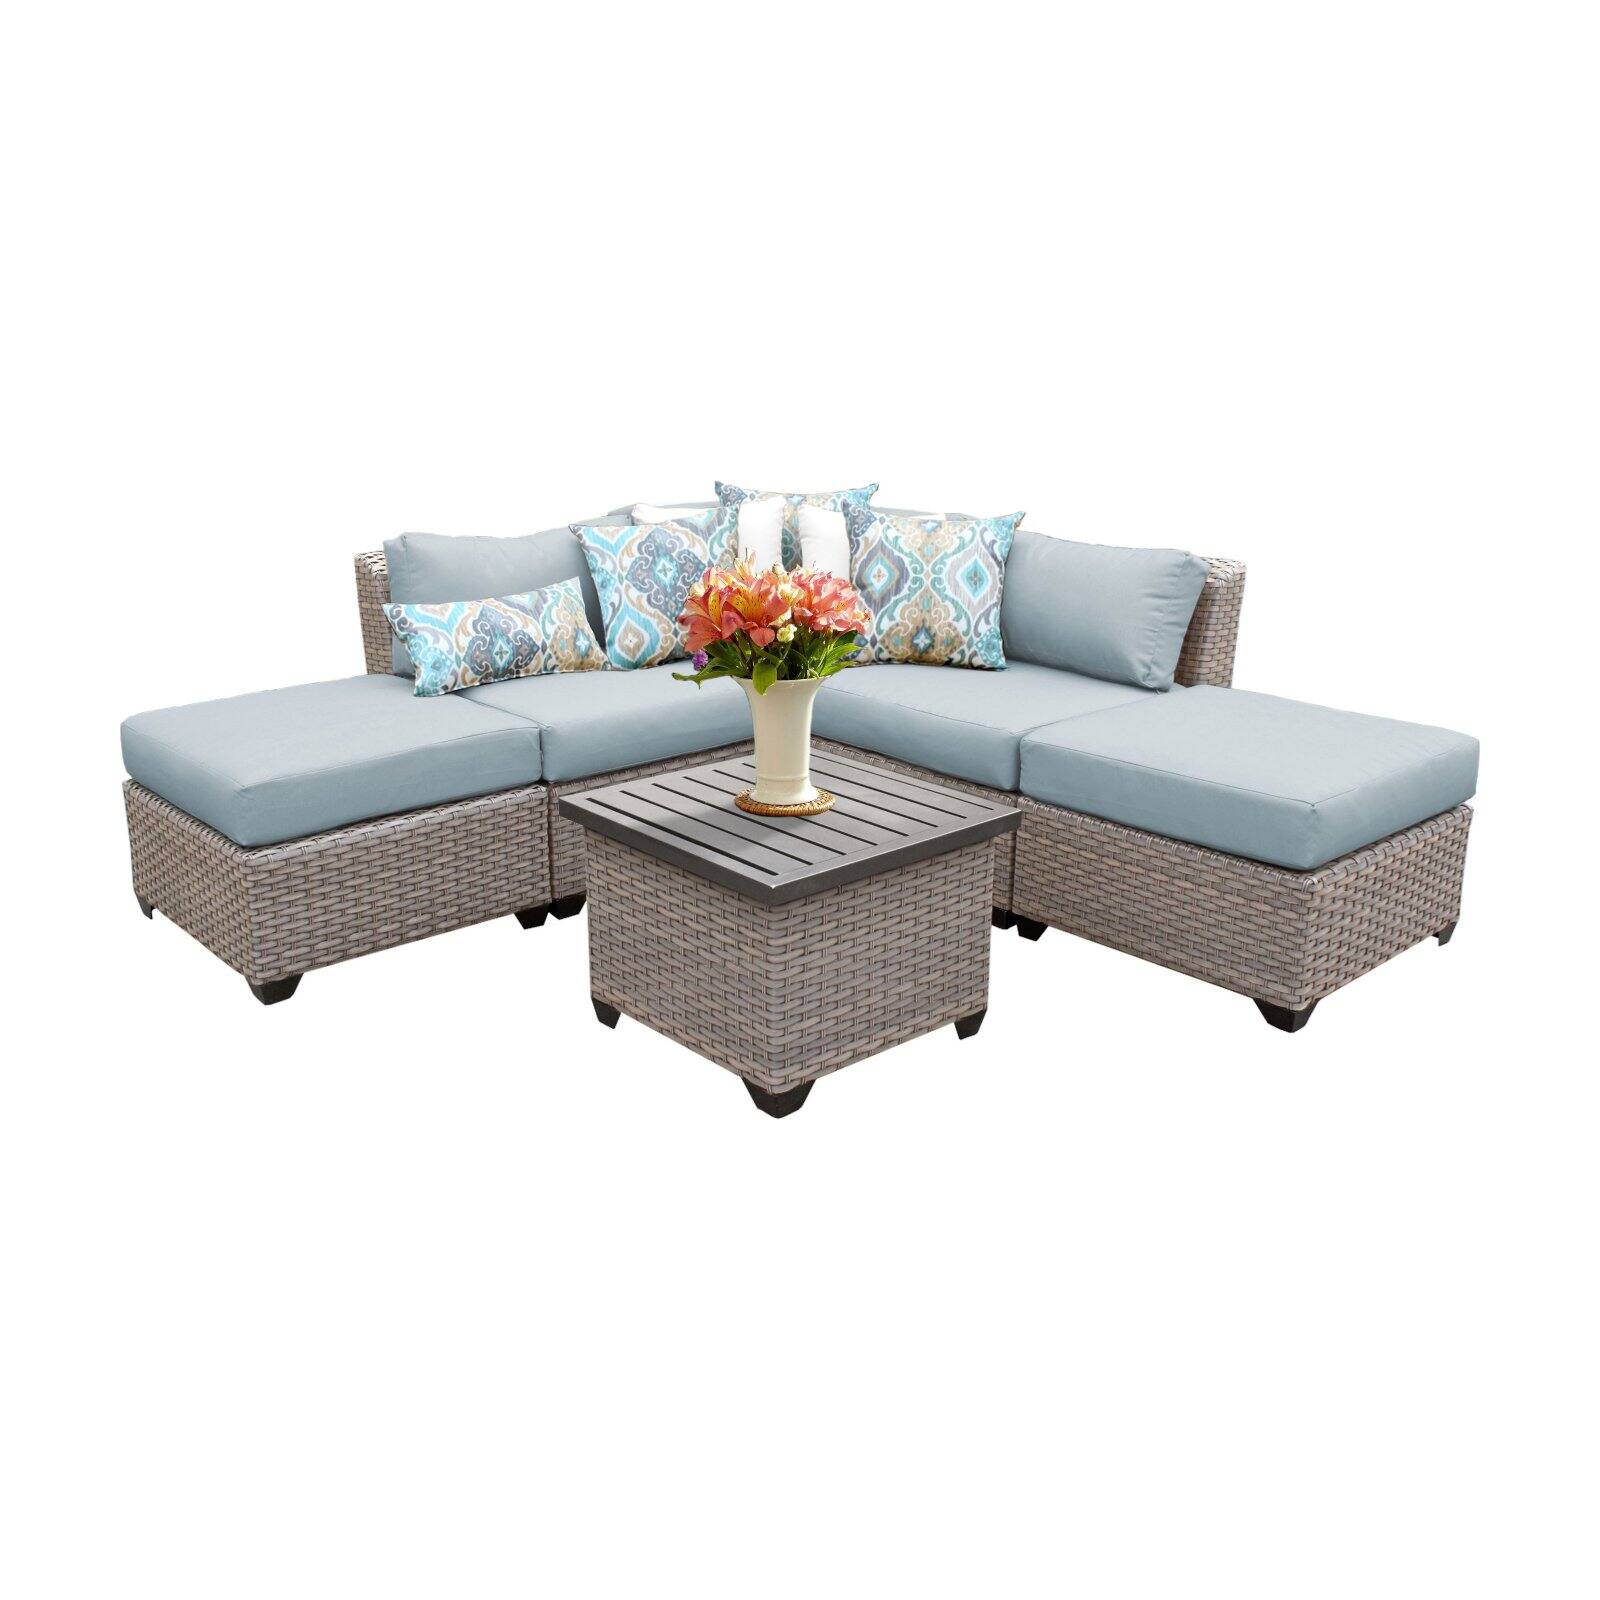 TK Classics Florence Wicker 6 Piece Patio Conversation Set with 2 Sets of Cushion Covers - image 2 of 2